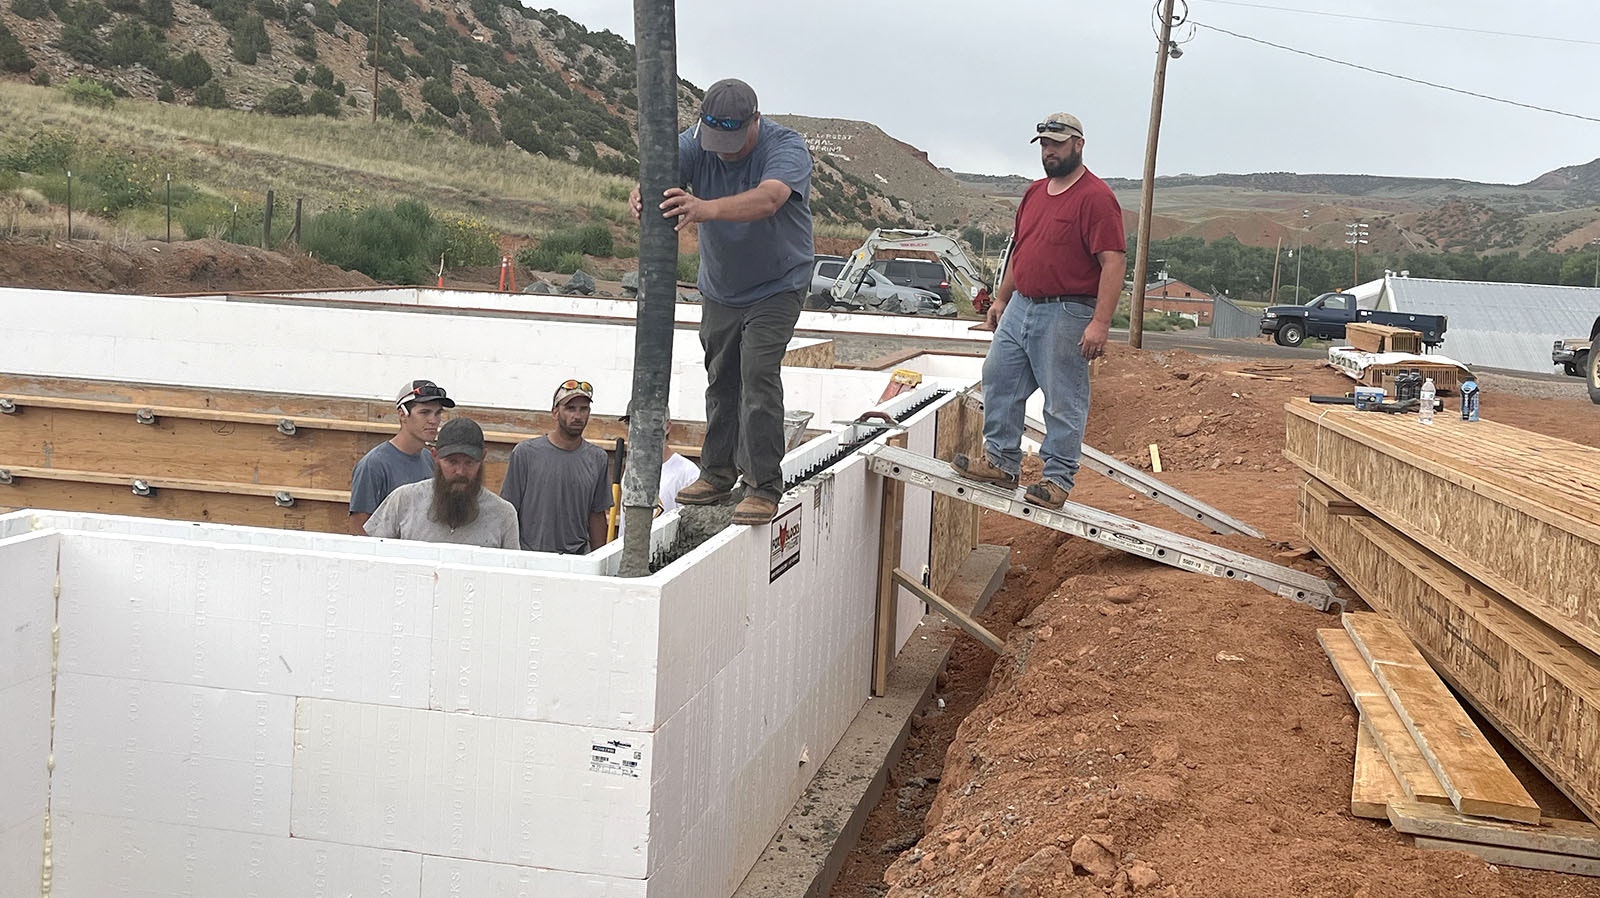 Jared Jeffs mans the cement hose in what will be the Hot Springs County School District’s first teacherage, a product of maintenance crew, student gumption and vision from school leaders.